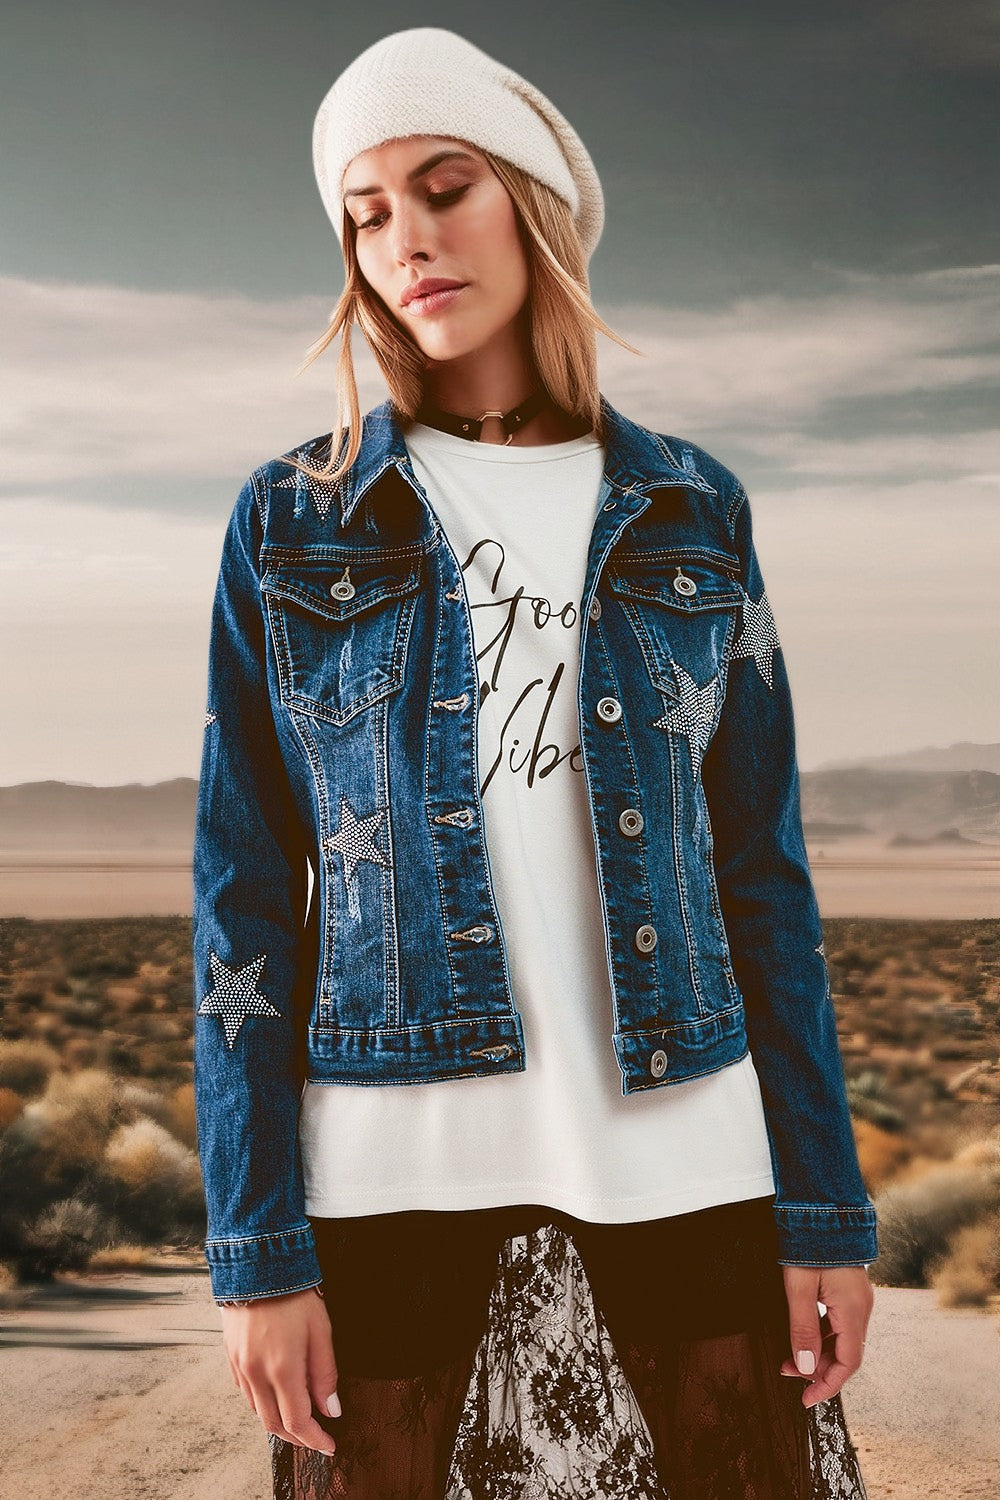 A woman standing on a desert road wearing a medium wash denim jacket embellished with stars.